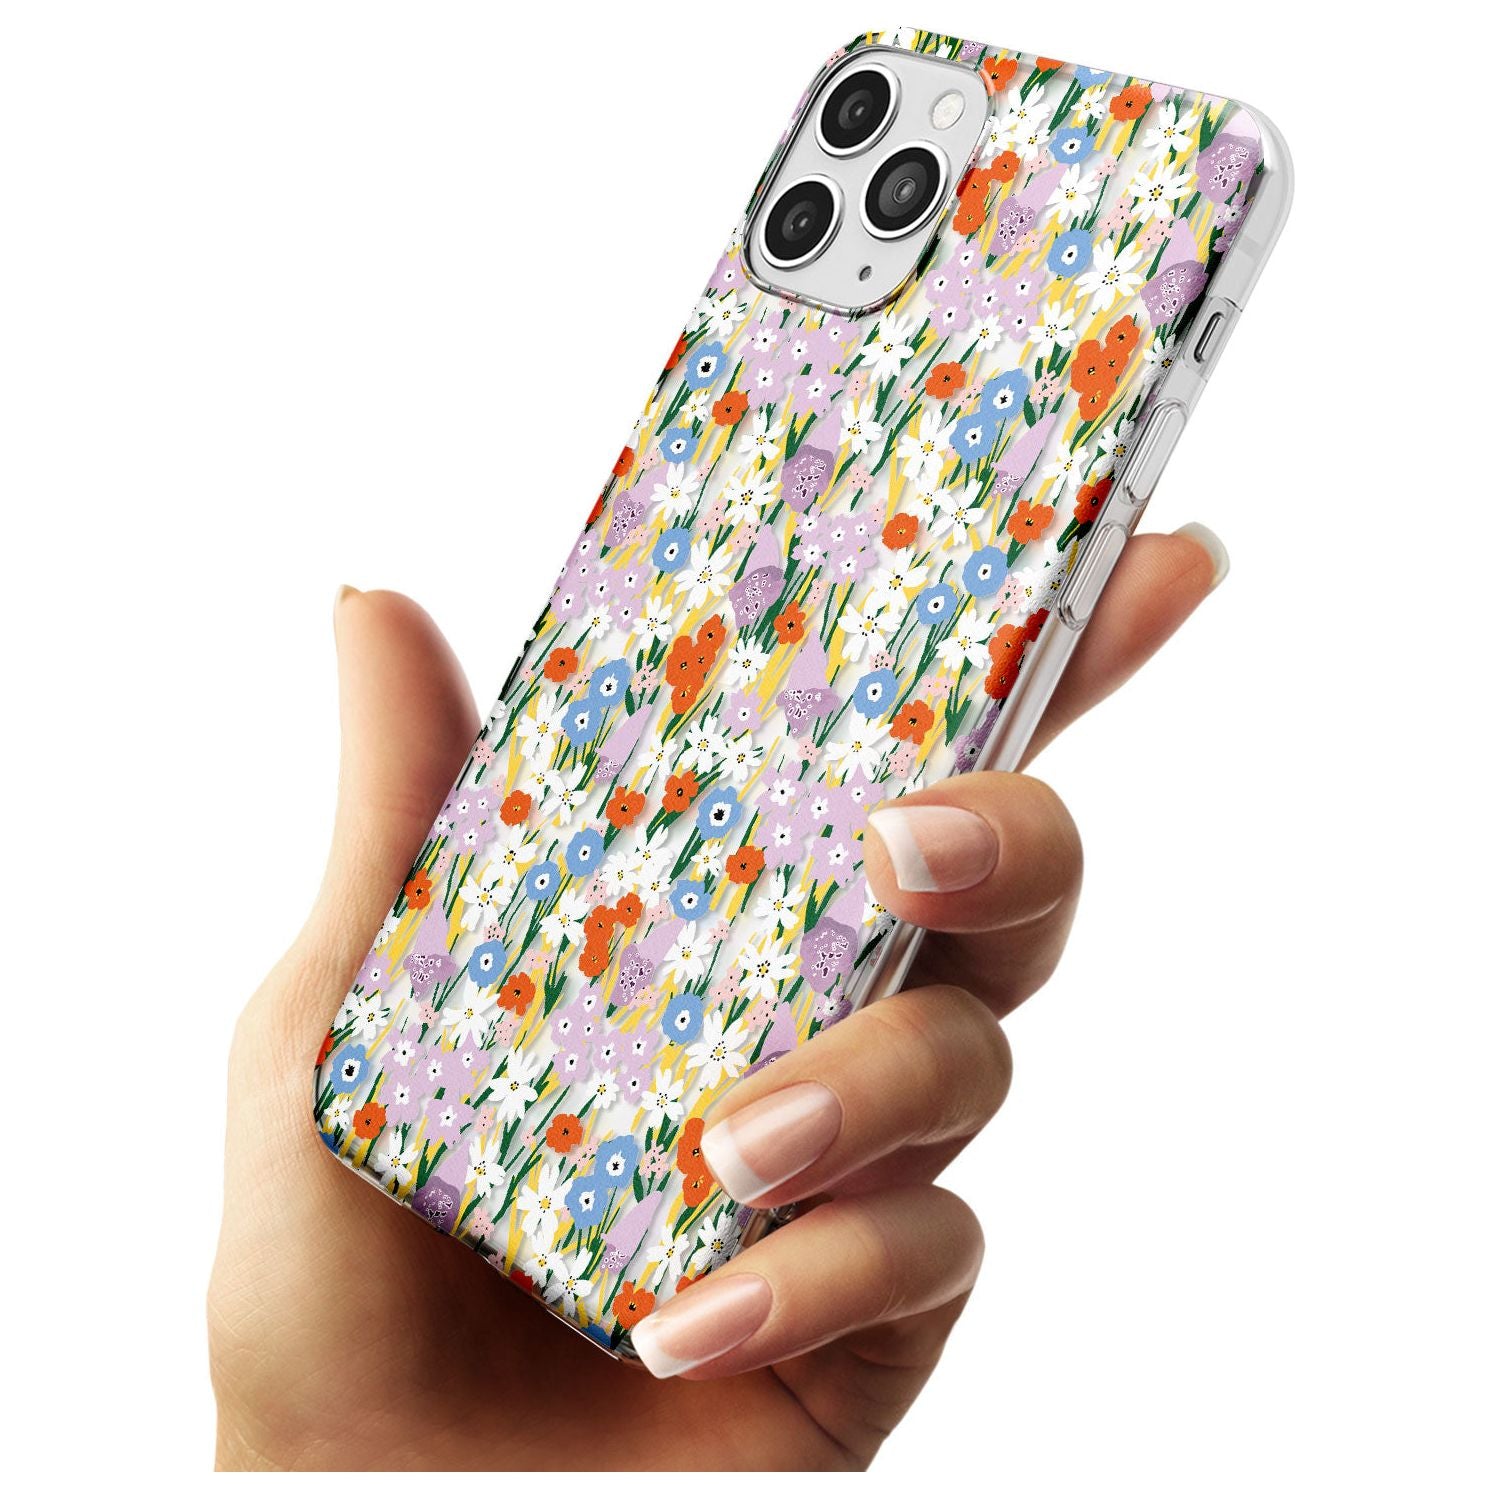 Energetic Floral Mix: Transparent Black Impact Phone Case for iPhone 11 Pro Max